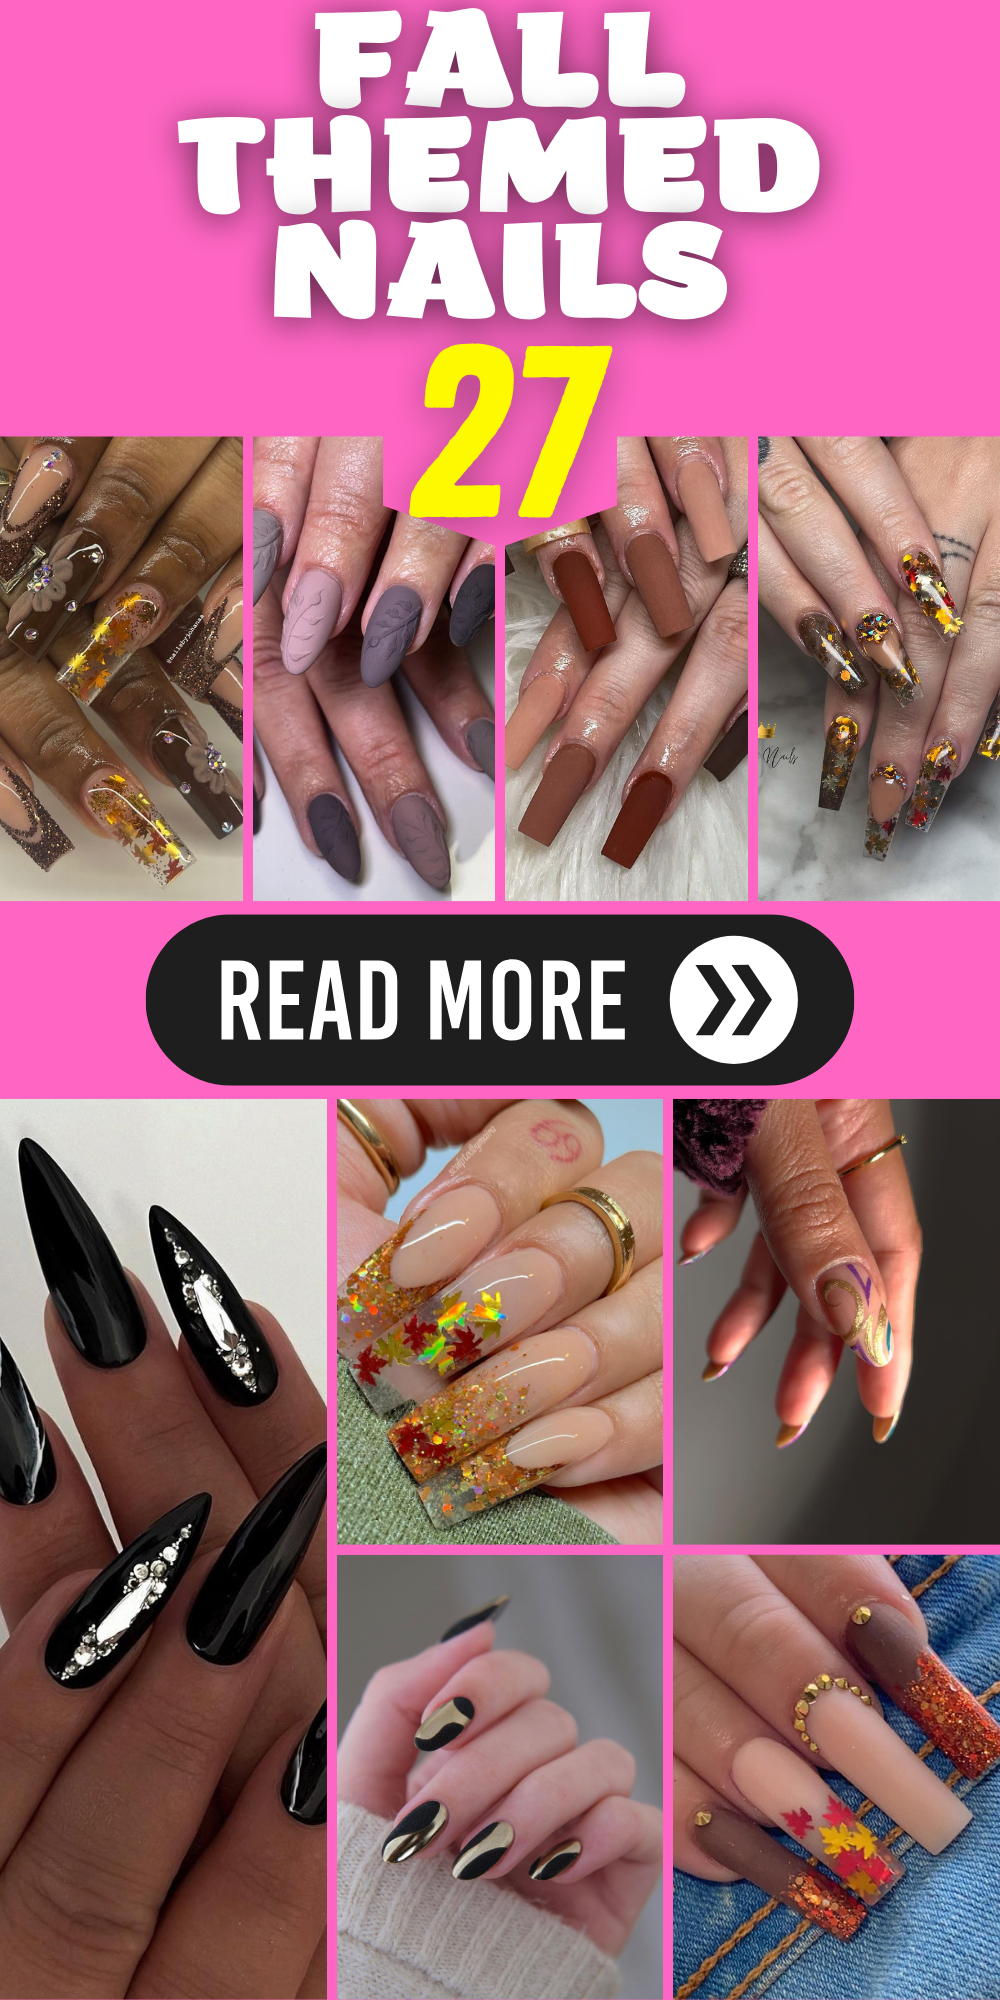 27 Ideas for Fall Themed Nails